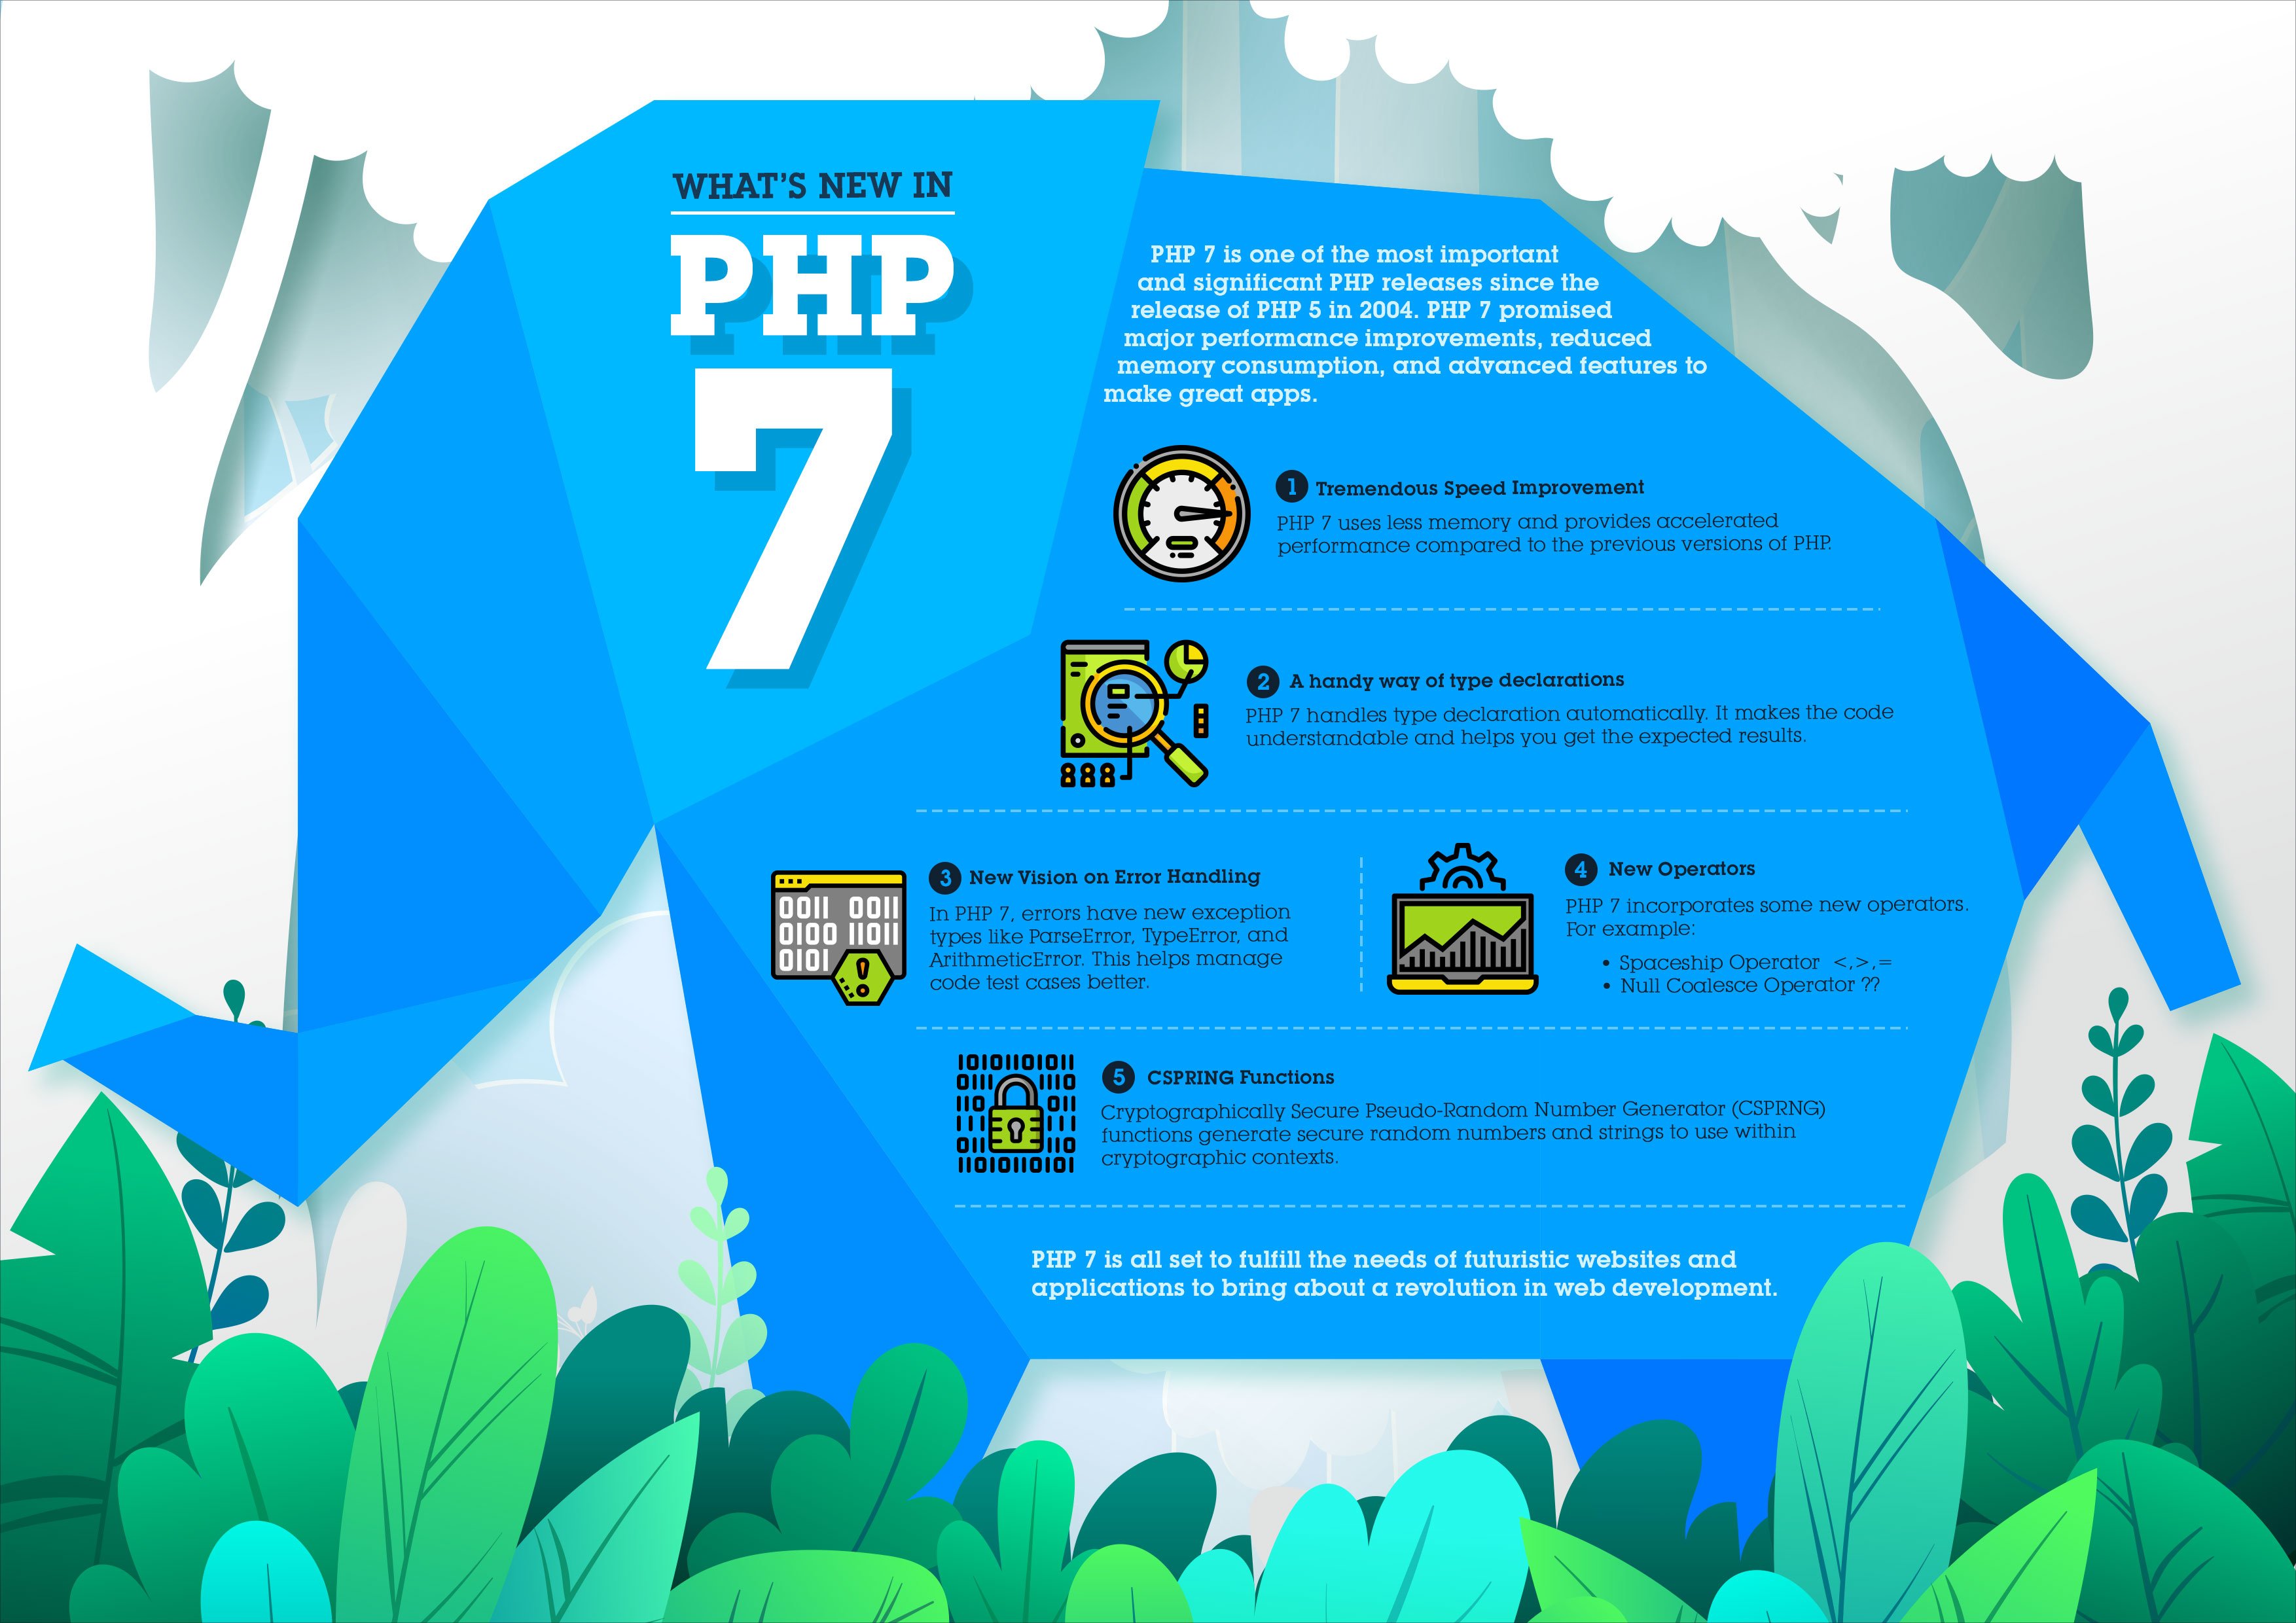 What's new in PHP 7?